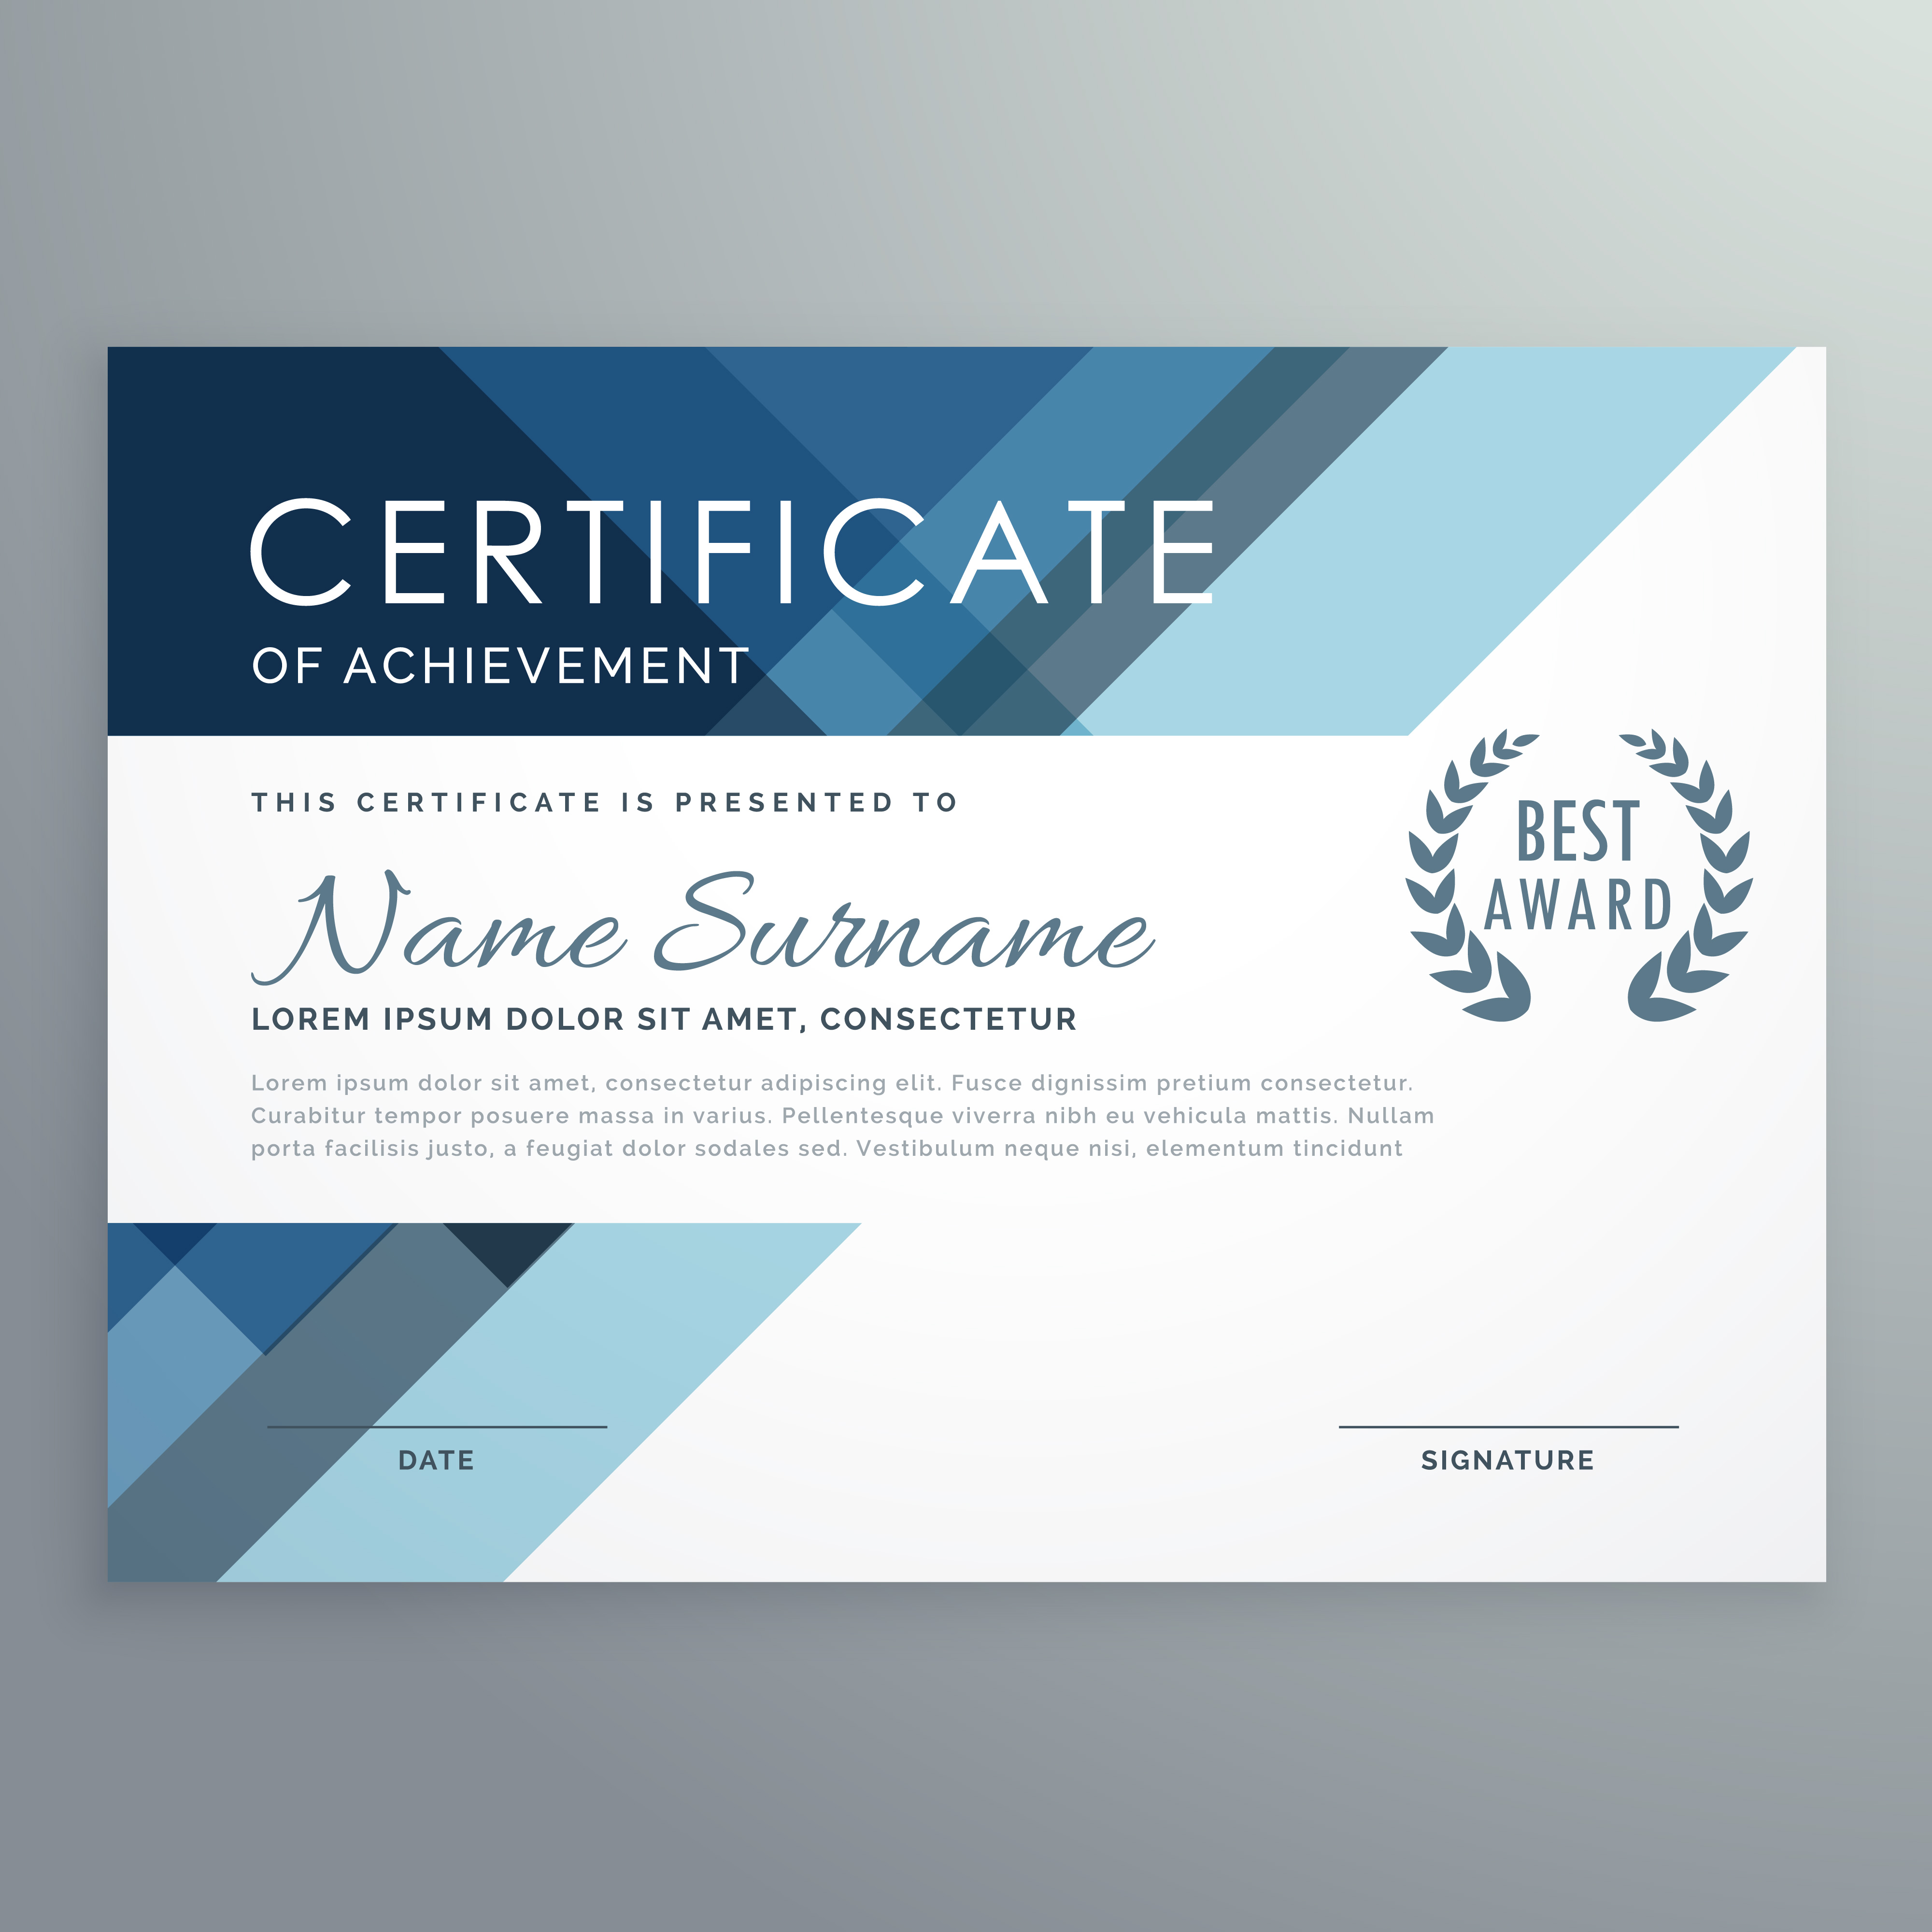 Download blue certificate design in professional style - Download Free Vector Art, Stock Graphics & Images